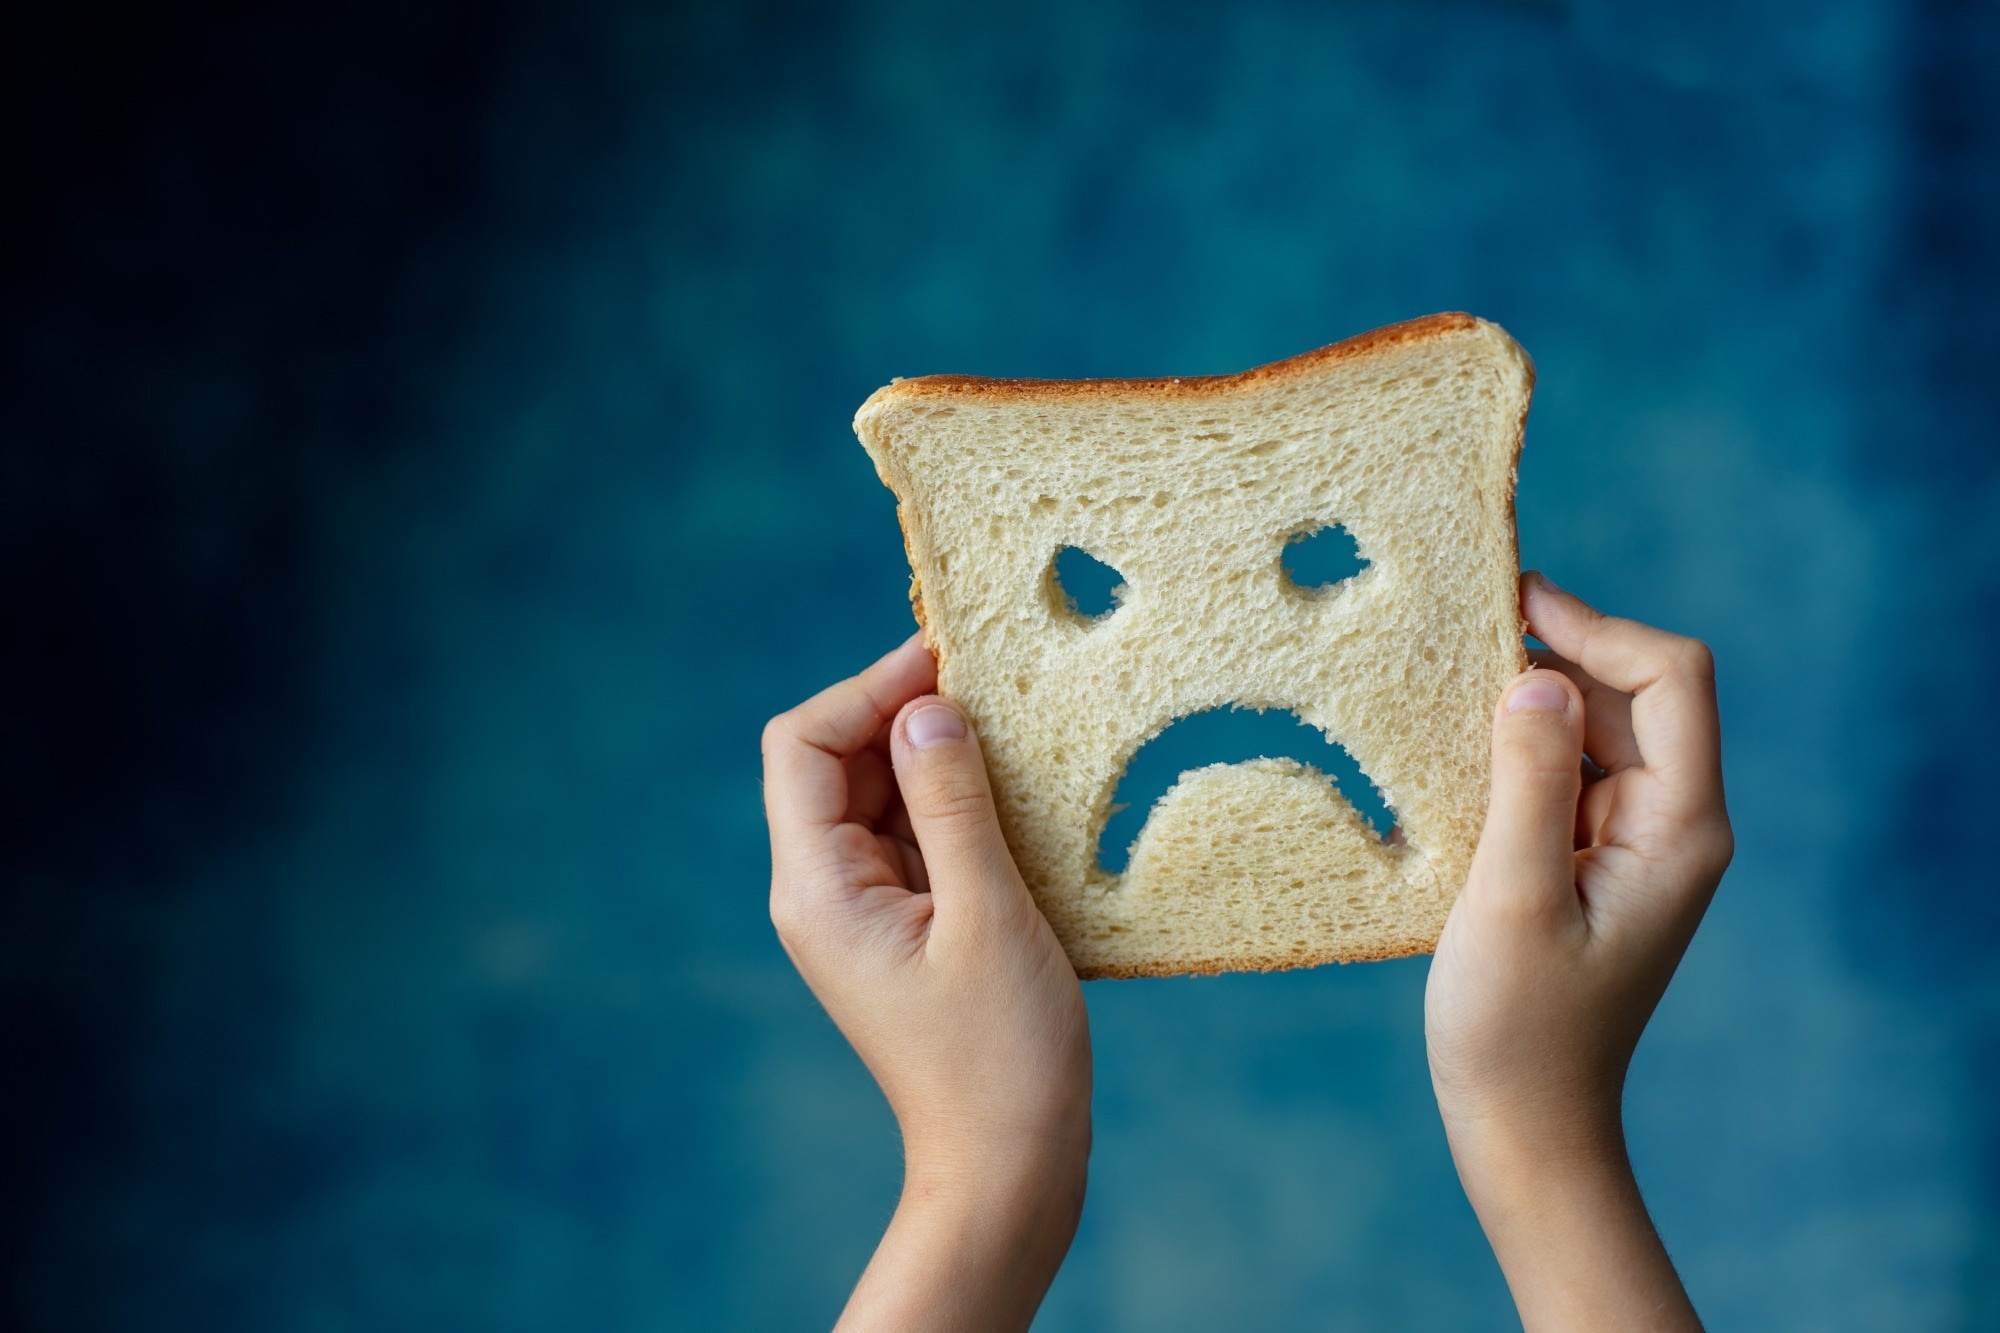 Study: Associations of dietary patterns between age 9 and 24 months with risk of celiac disease autoimmunity and celiac disease among children at increased risk. Image Credit: Galigrafiya / Shutterstock